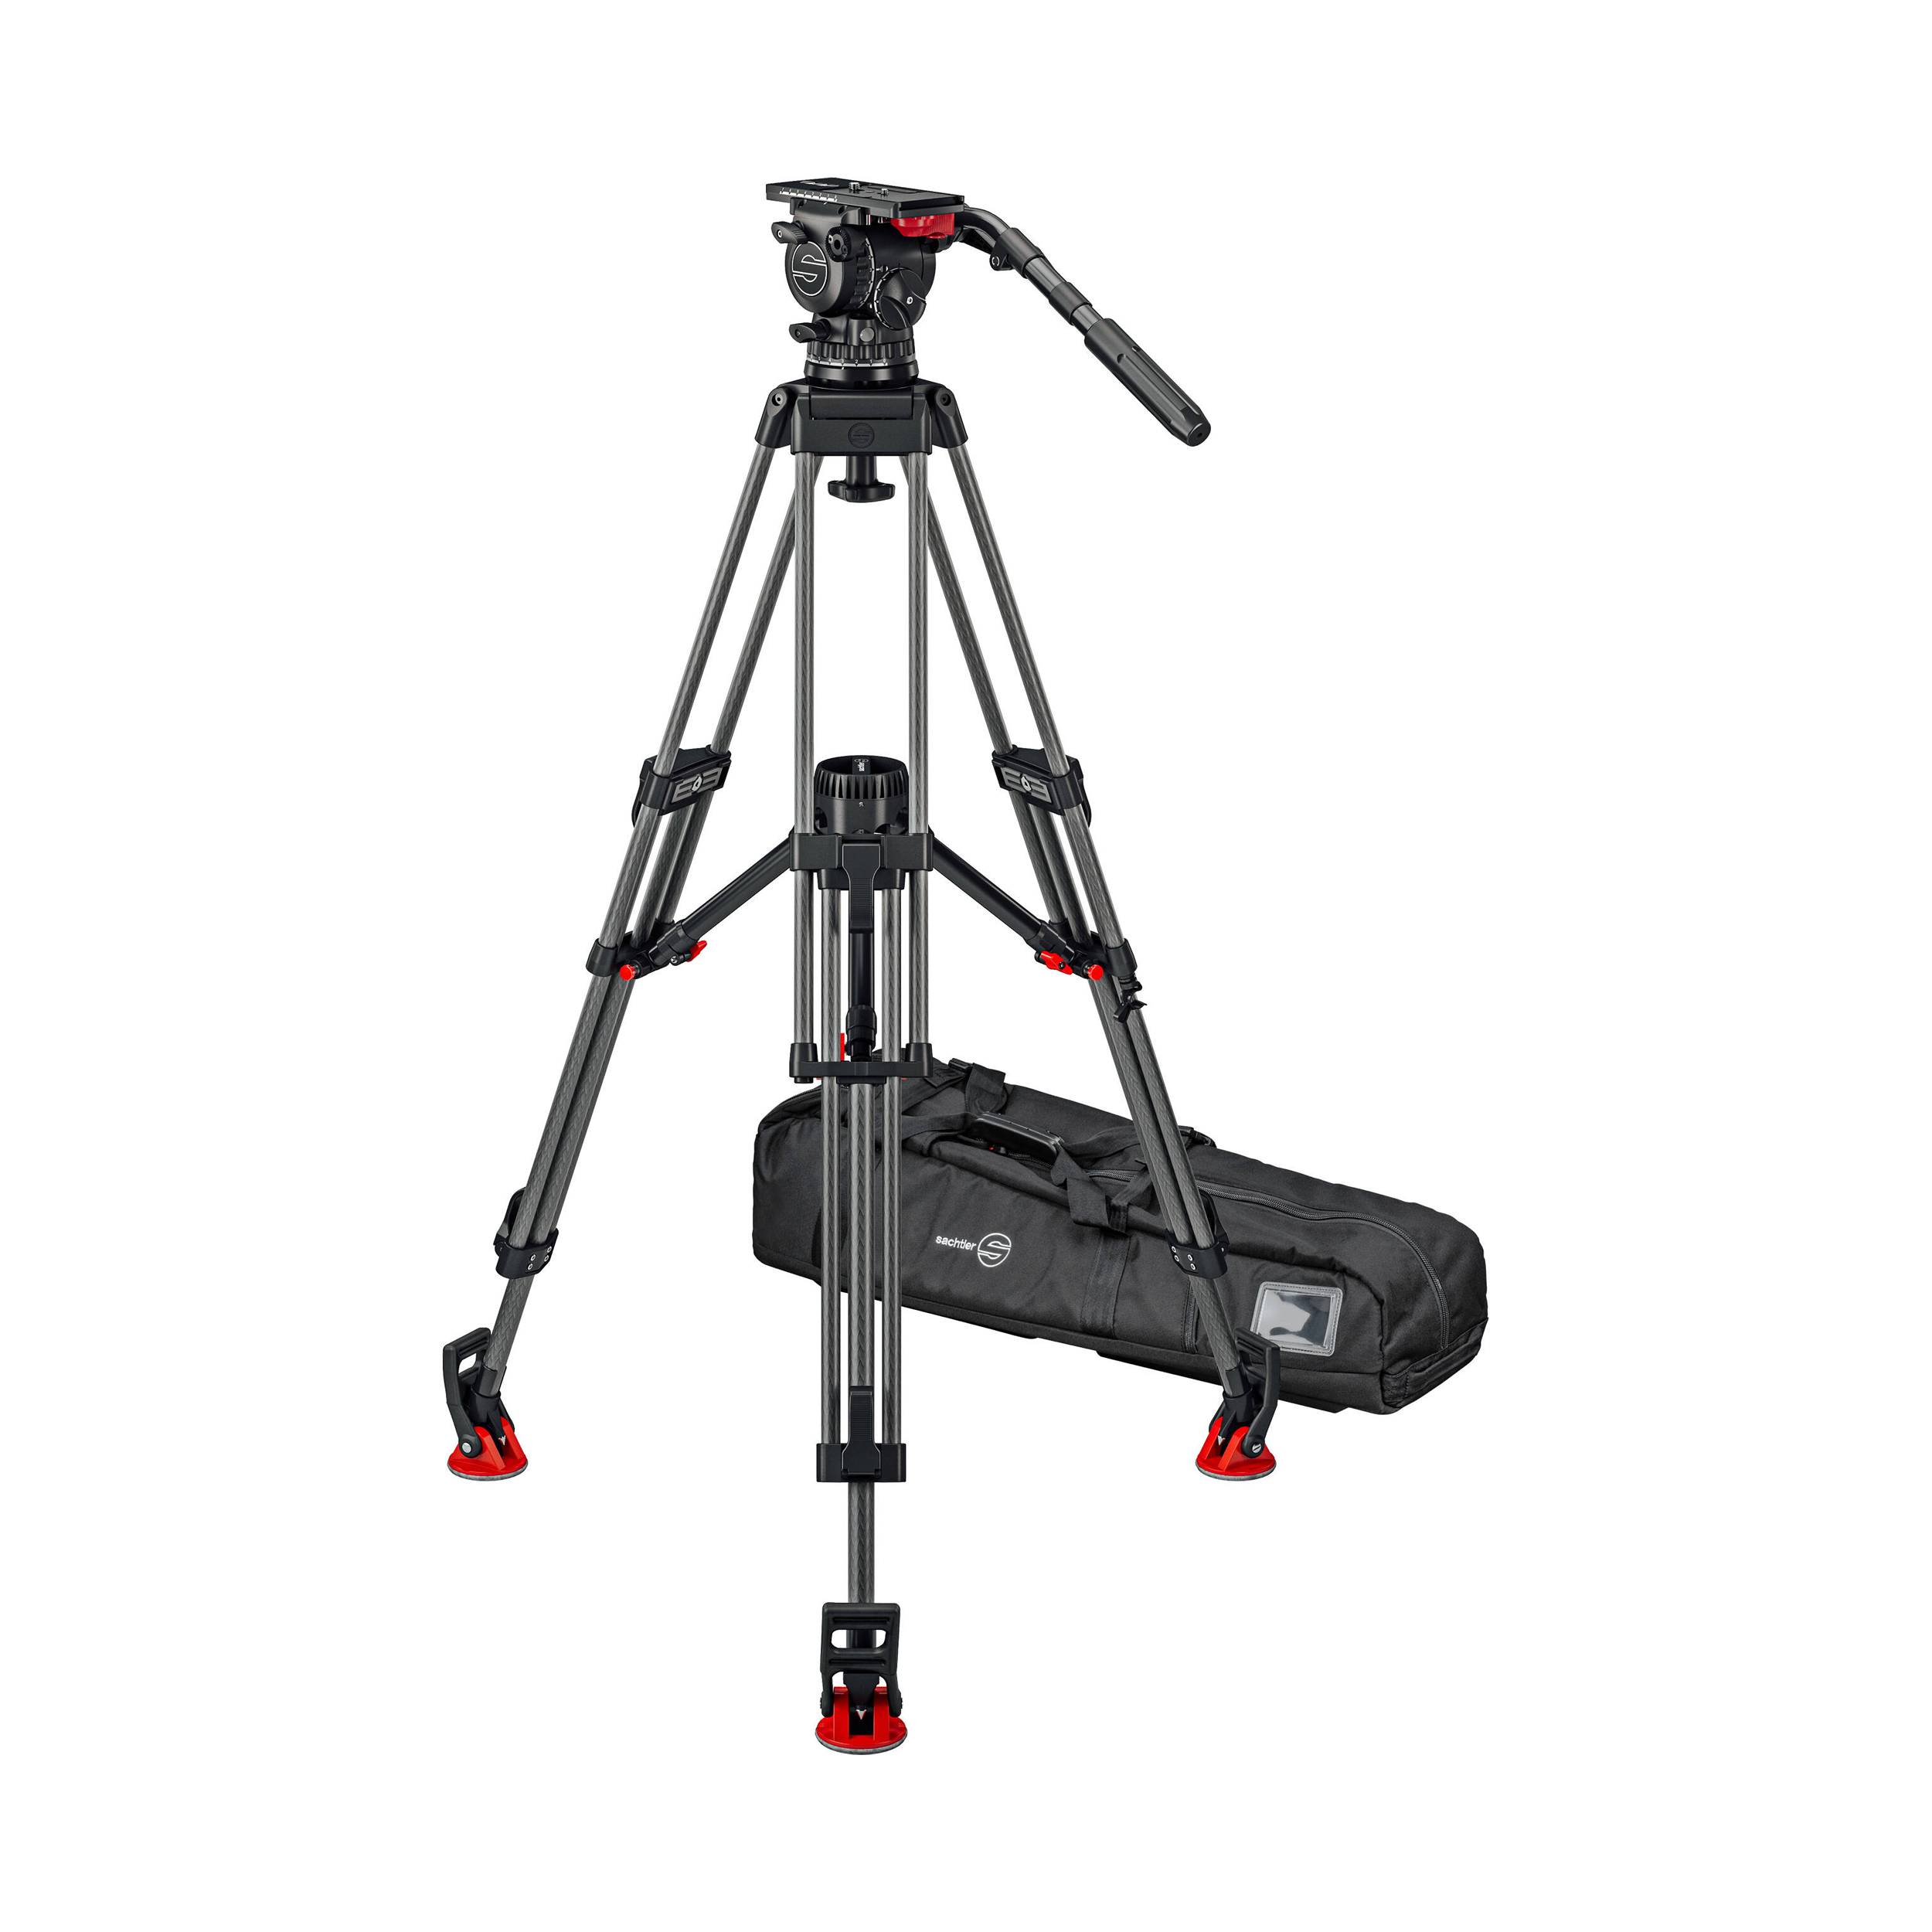 Sachtler FSB 14T Mk II 100mm Touch & Go Head with ENG 2 Carbon Fiber Tripod System (Mid-Level Spreader)